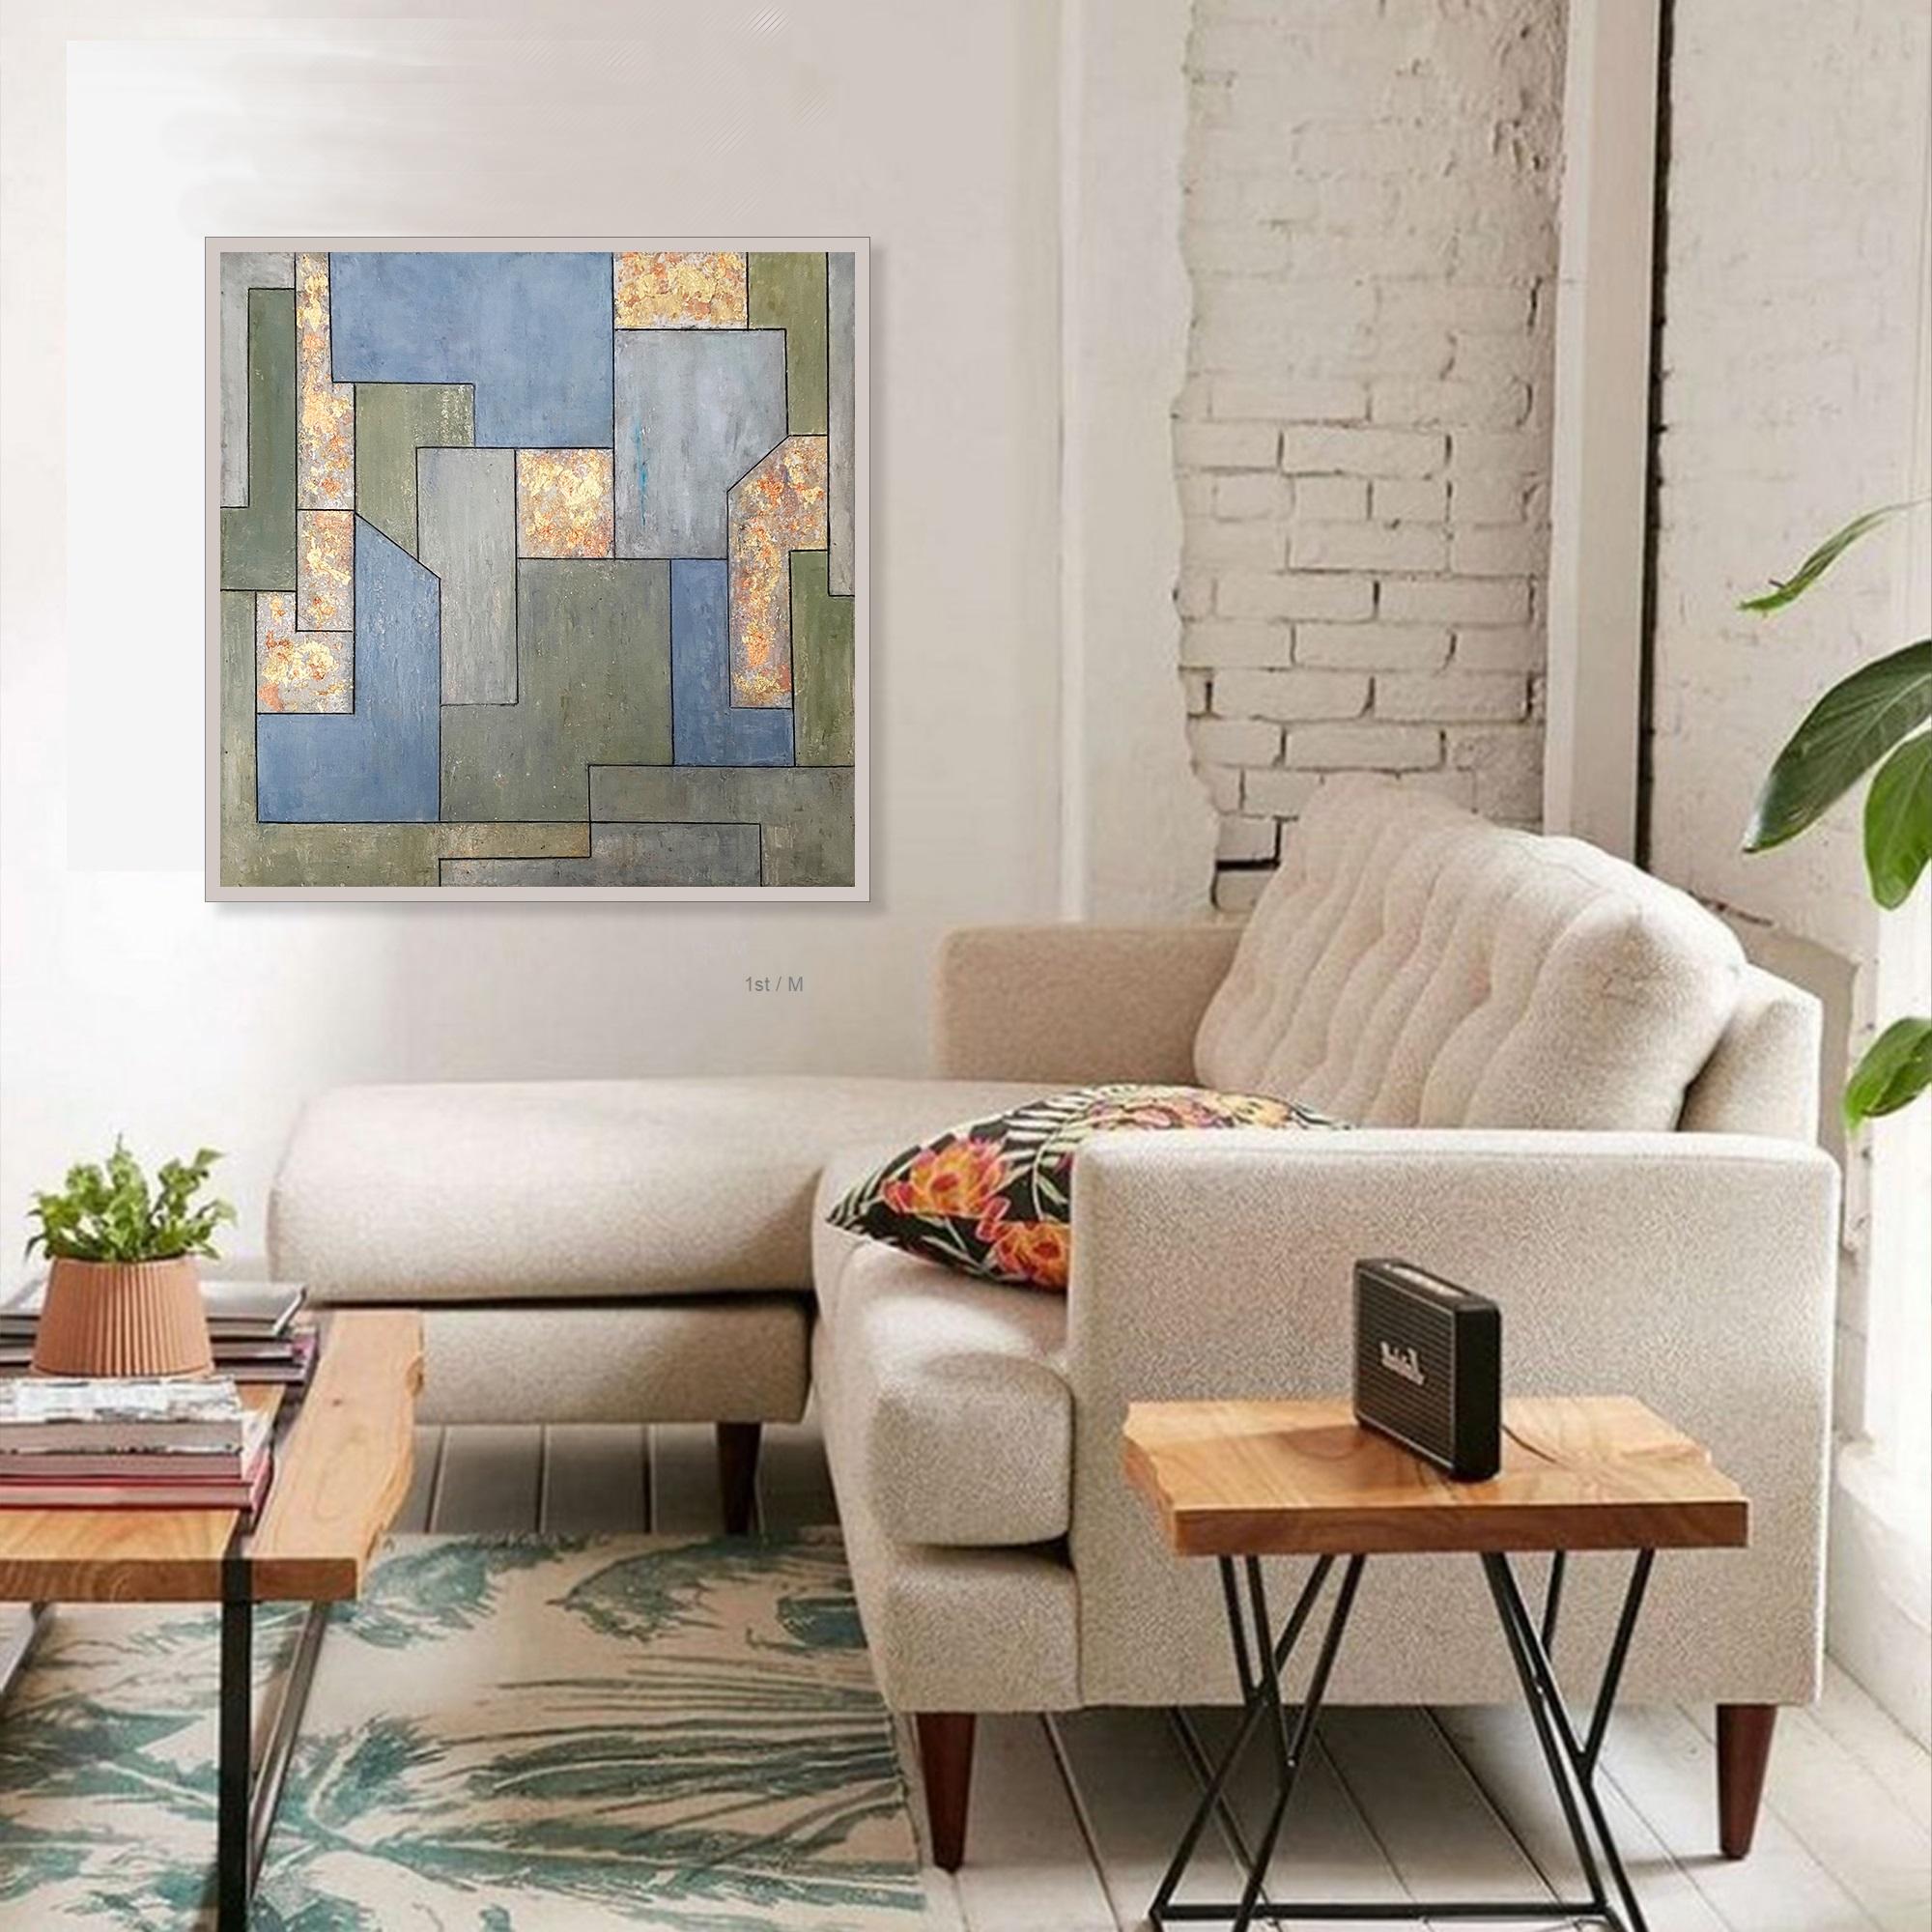 22x22x2 in. - Oil, Gold Leaf - Geometric Architectural Contemporary, Precious - Painting by Stephen Cimini